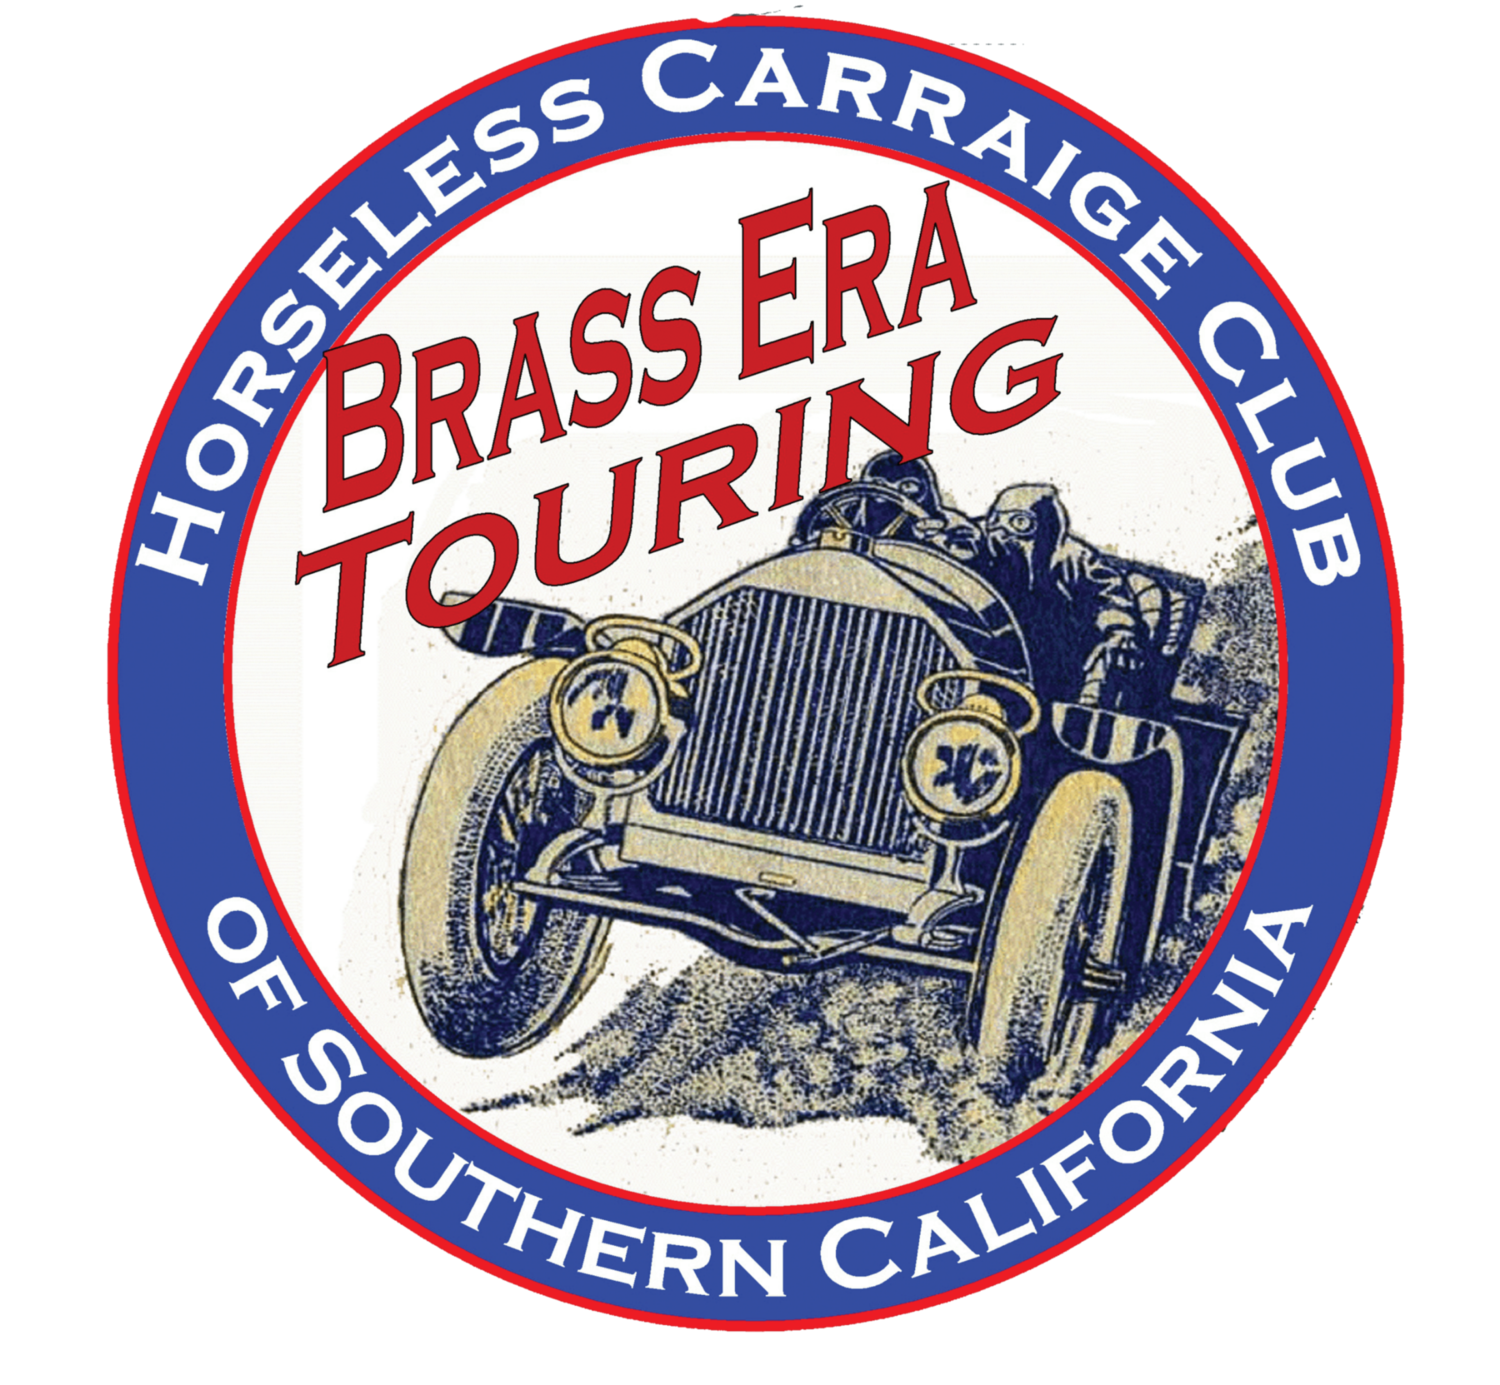 Horseless Carriage Club of Southern California